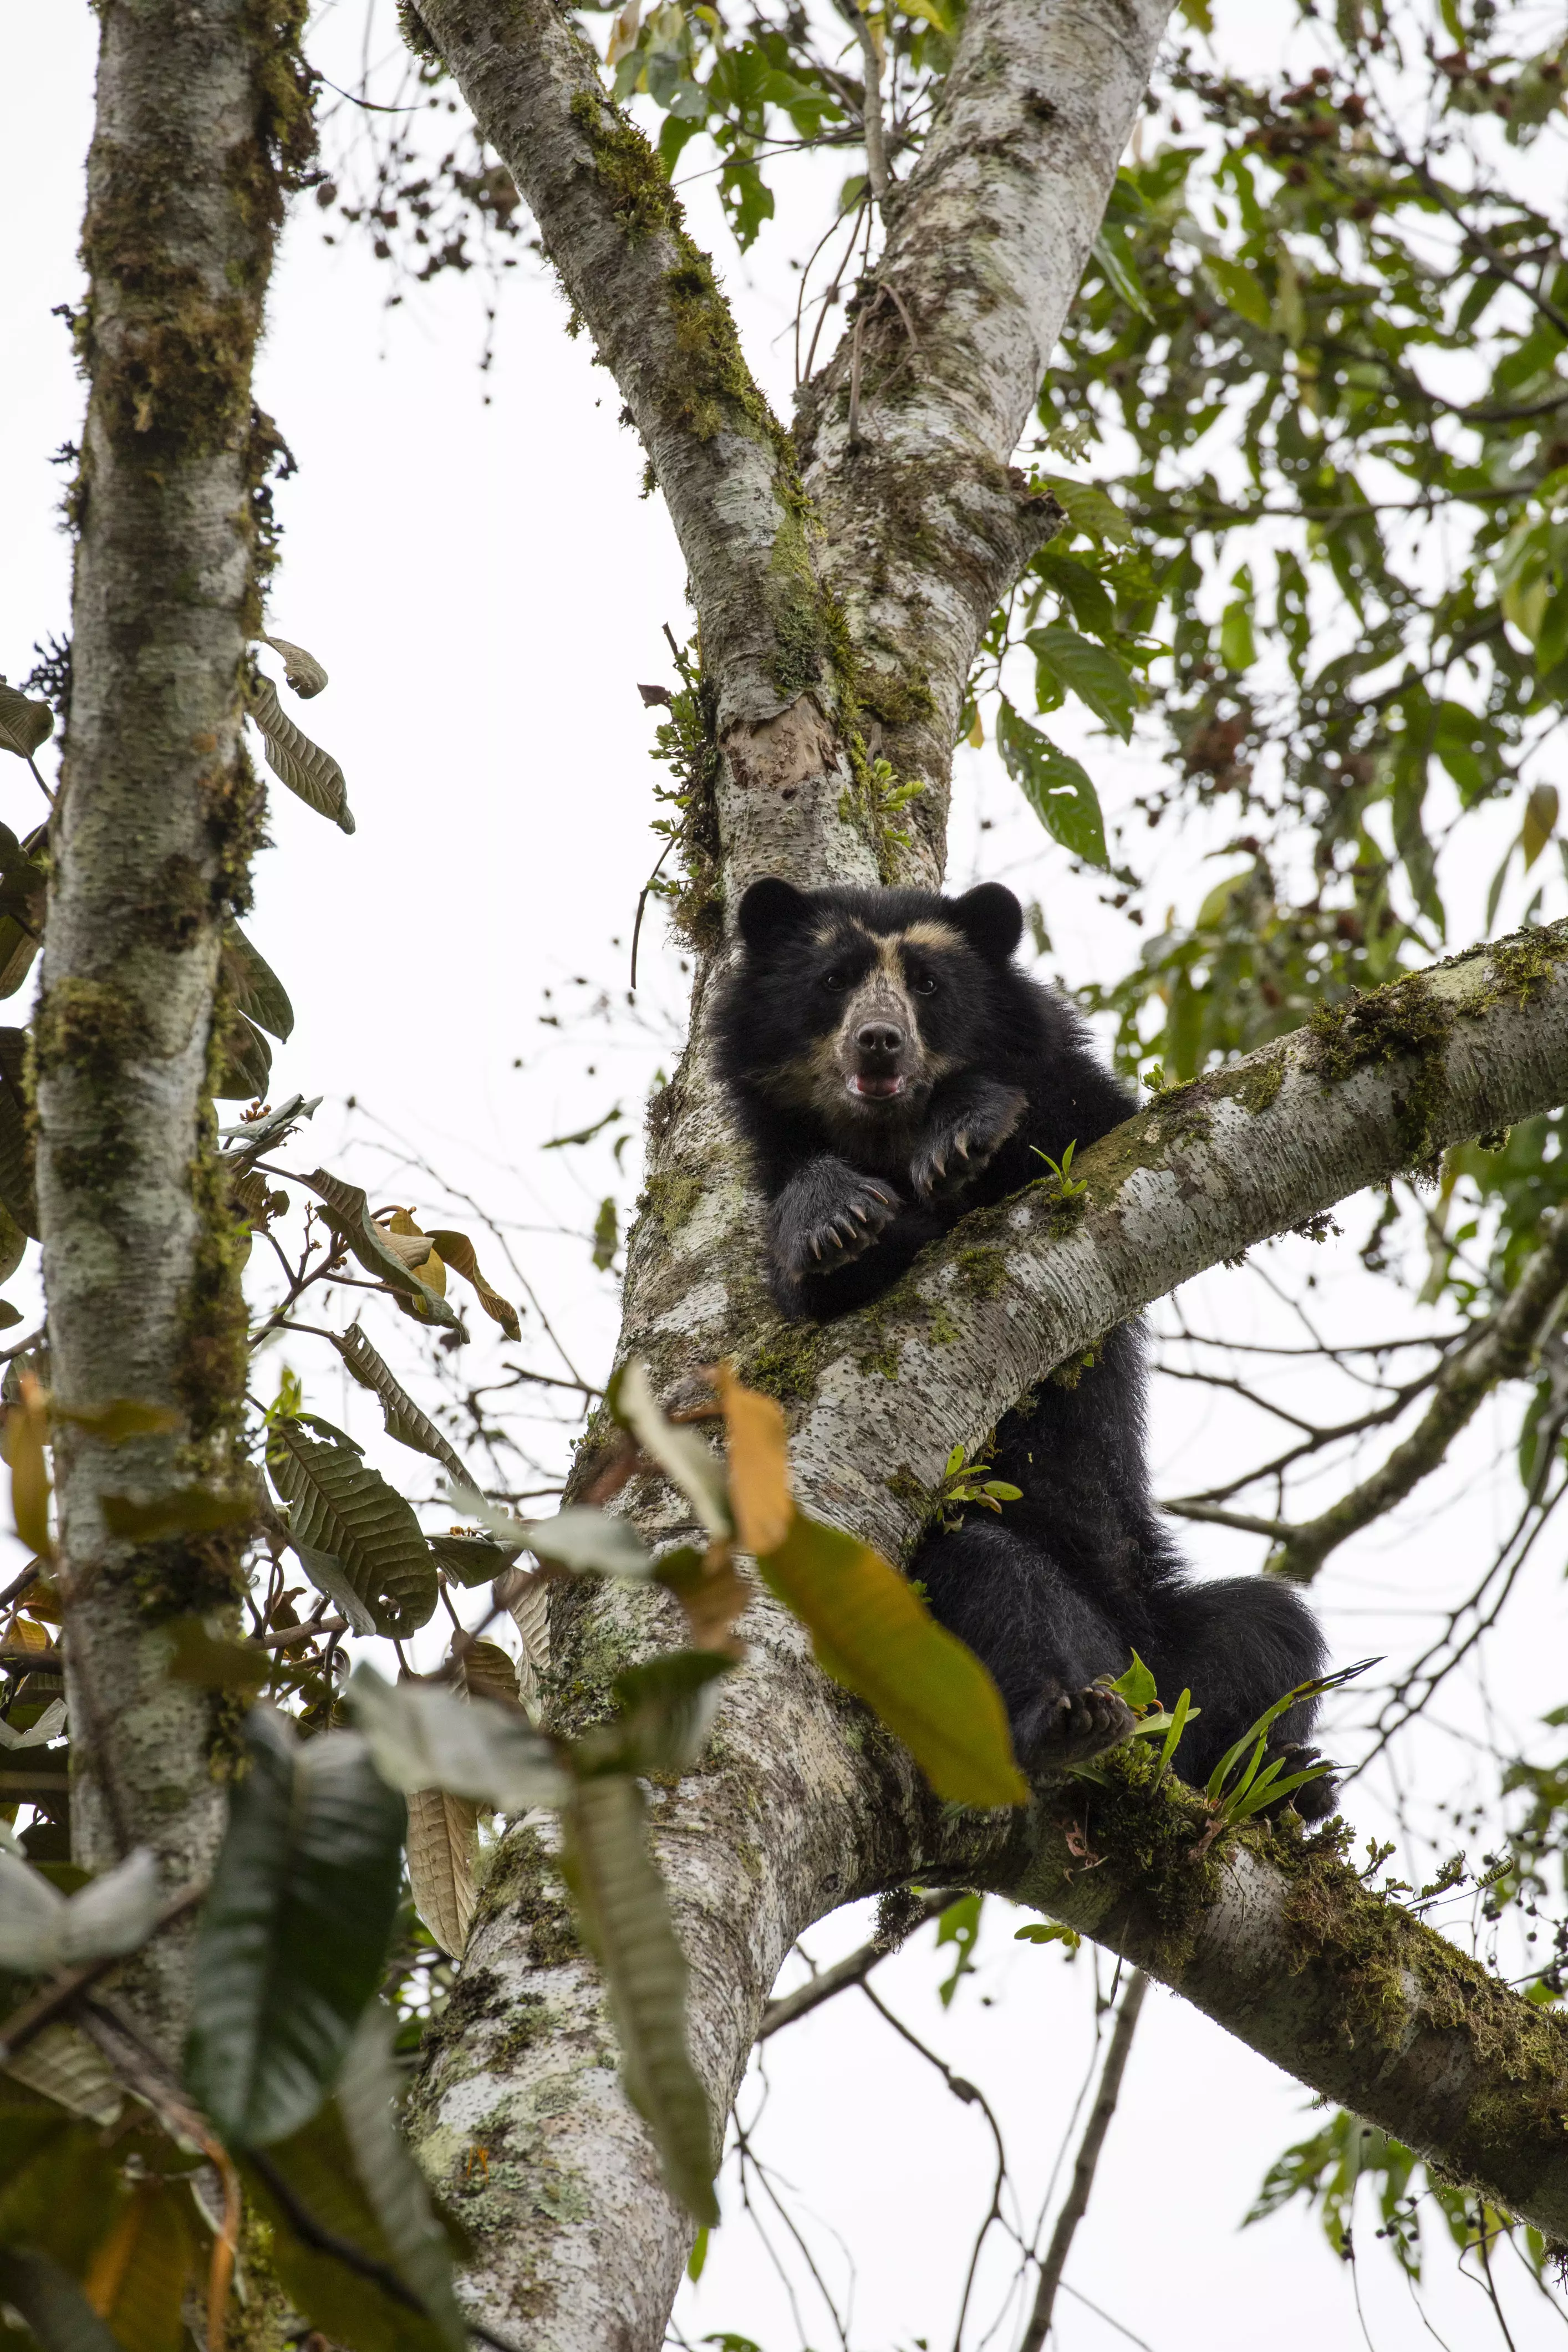 The Andean bear was featured in the programme but with the wrong noises in the background. (